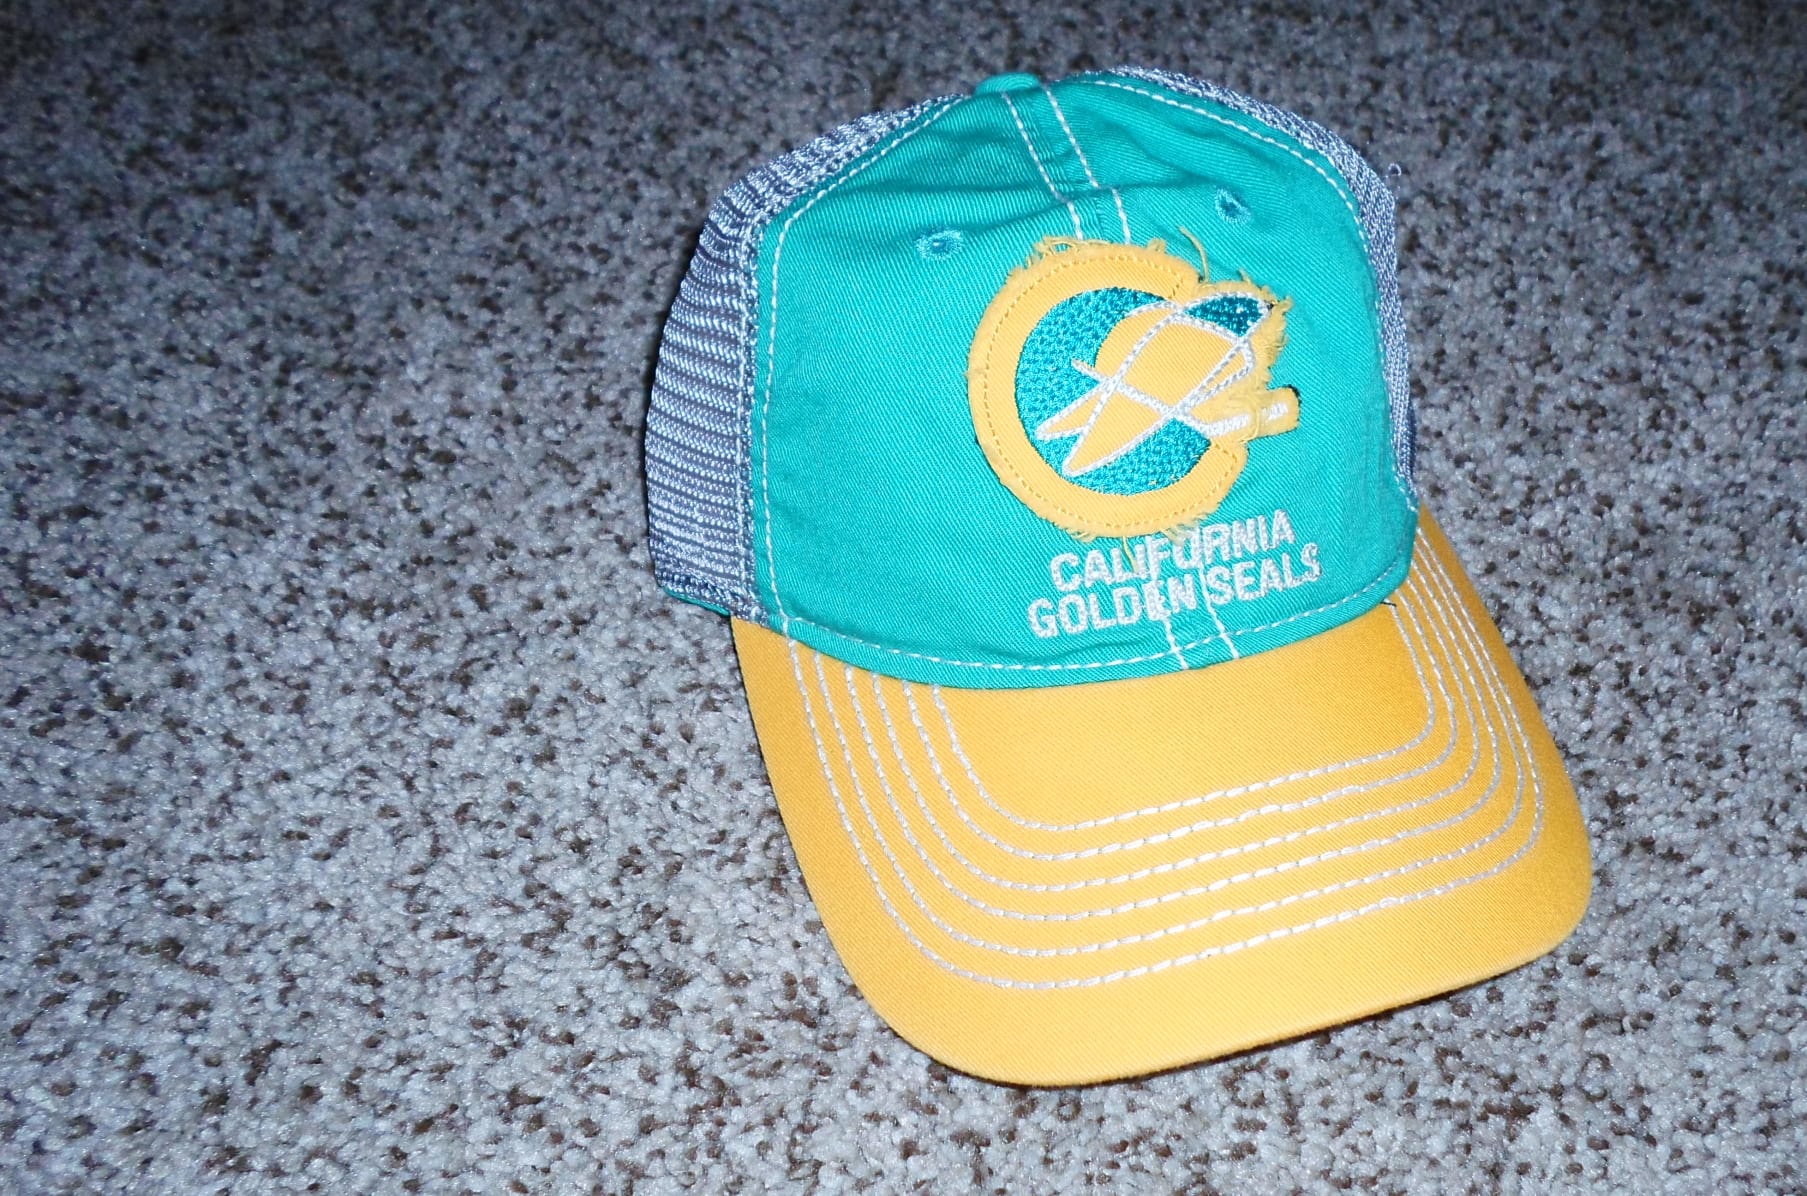 Review of The California Golden Seals Story Film - CaliSports News